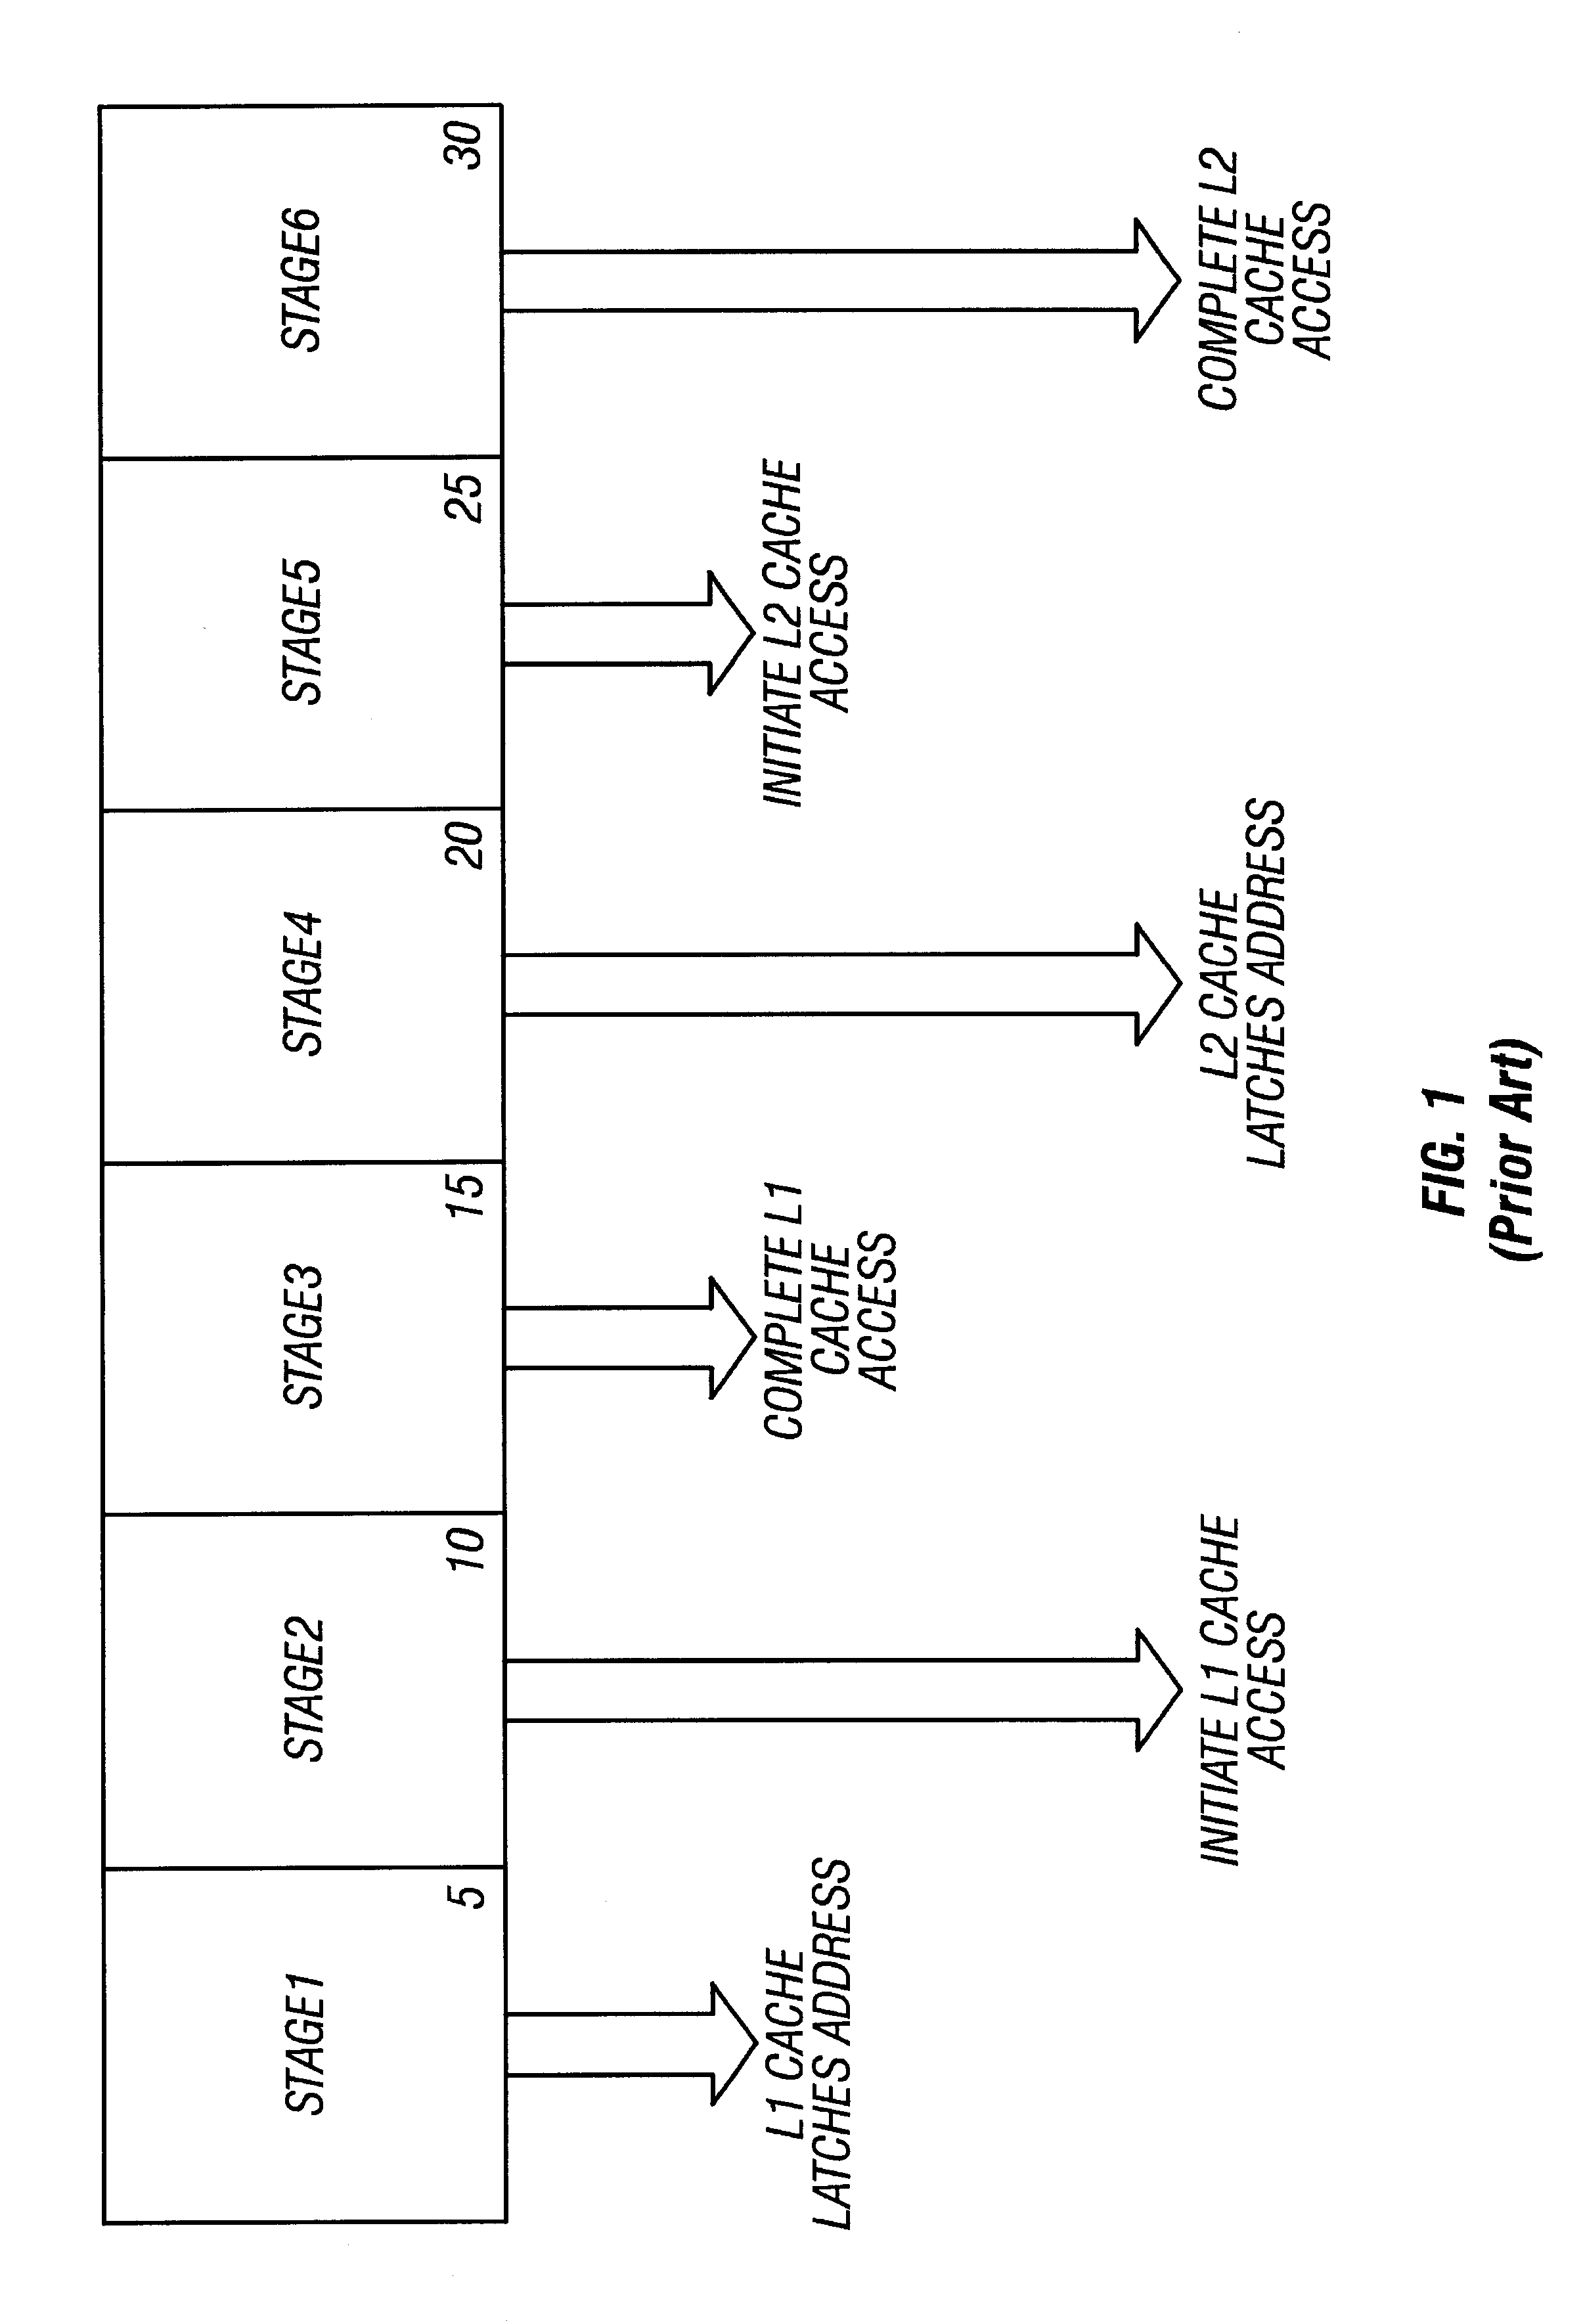 Cache memory architecture with on-chip tag array and off-chip data array